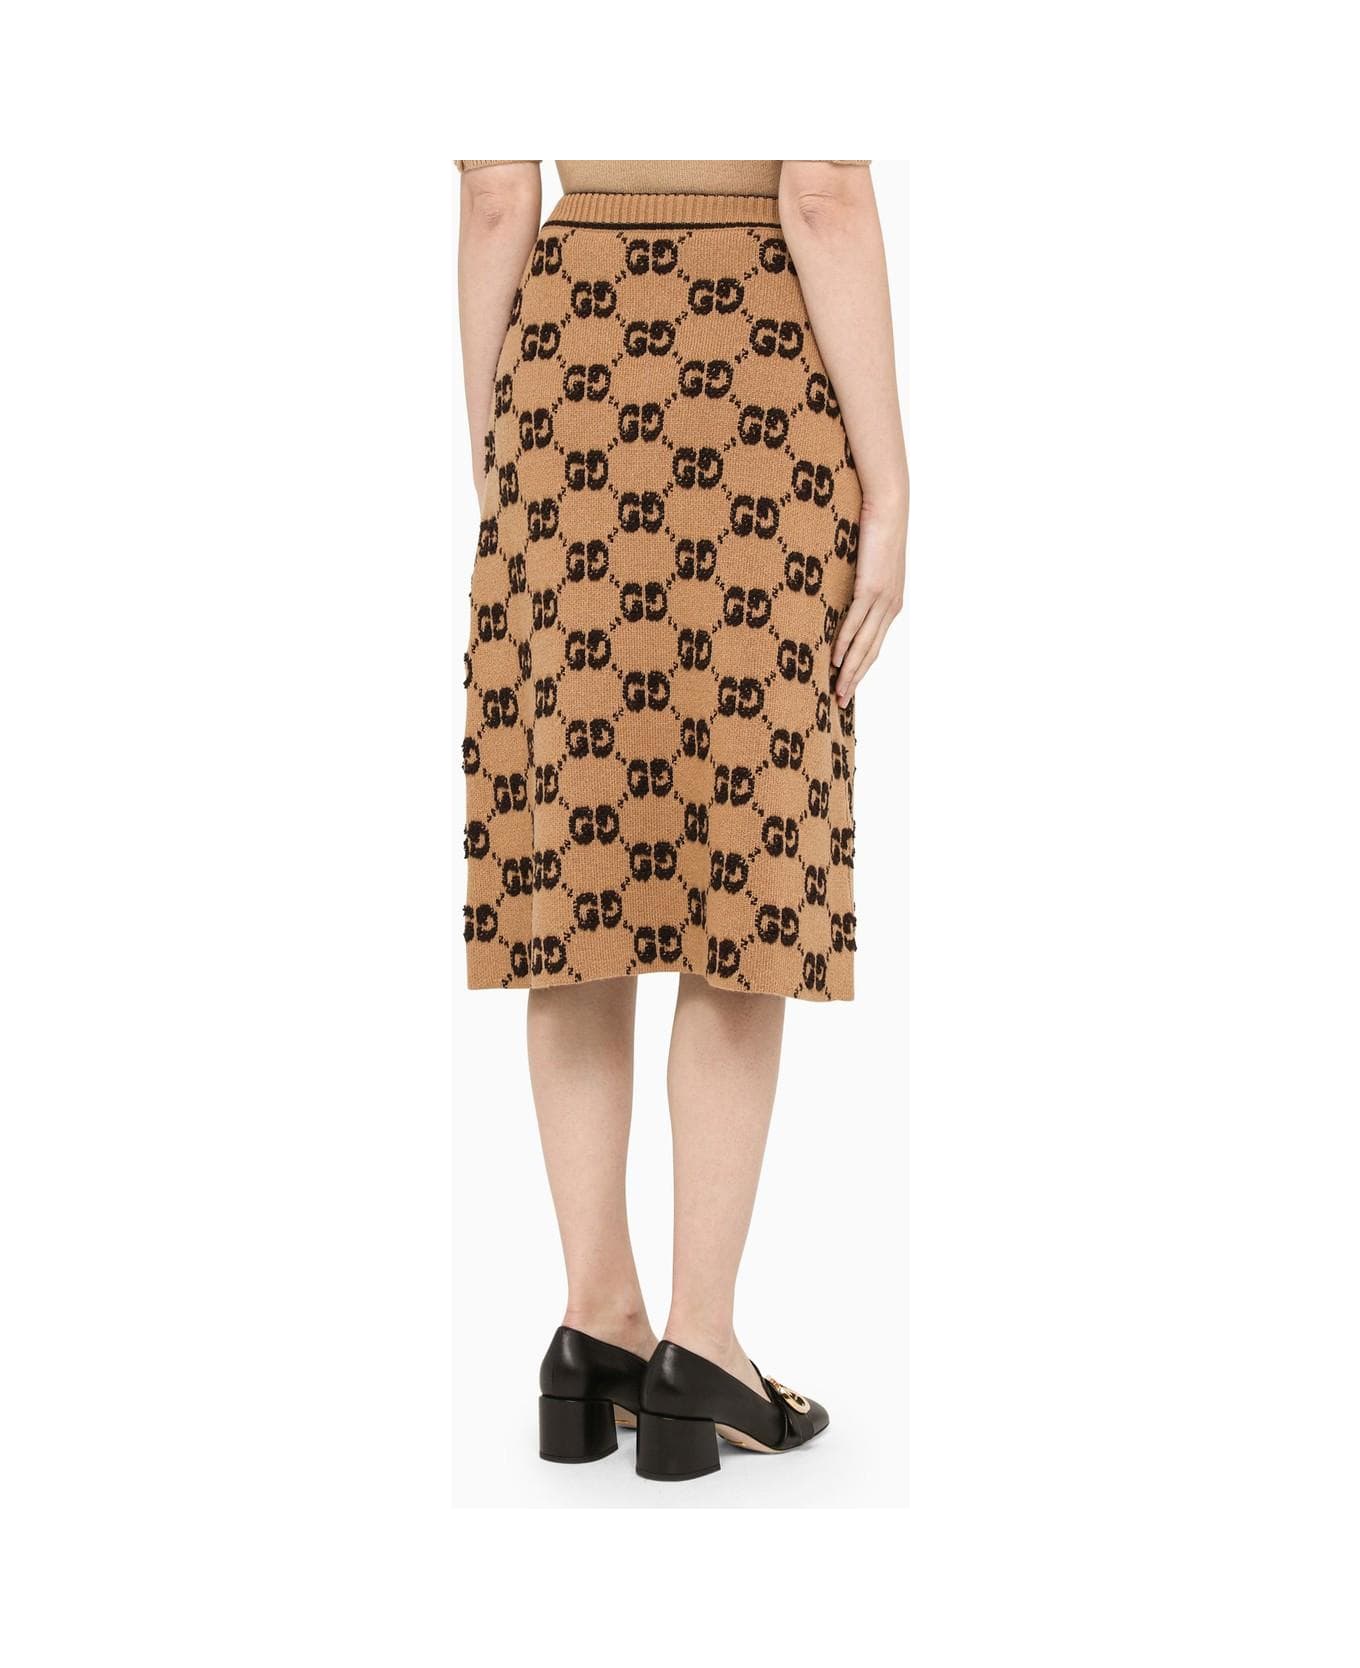 Gucci Camel Skirt In Wool Knit - Camel